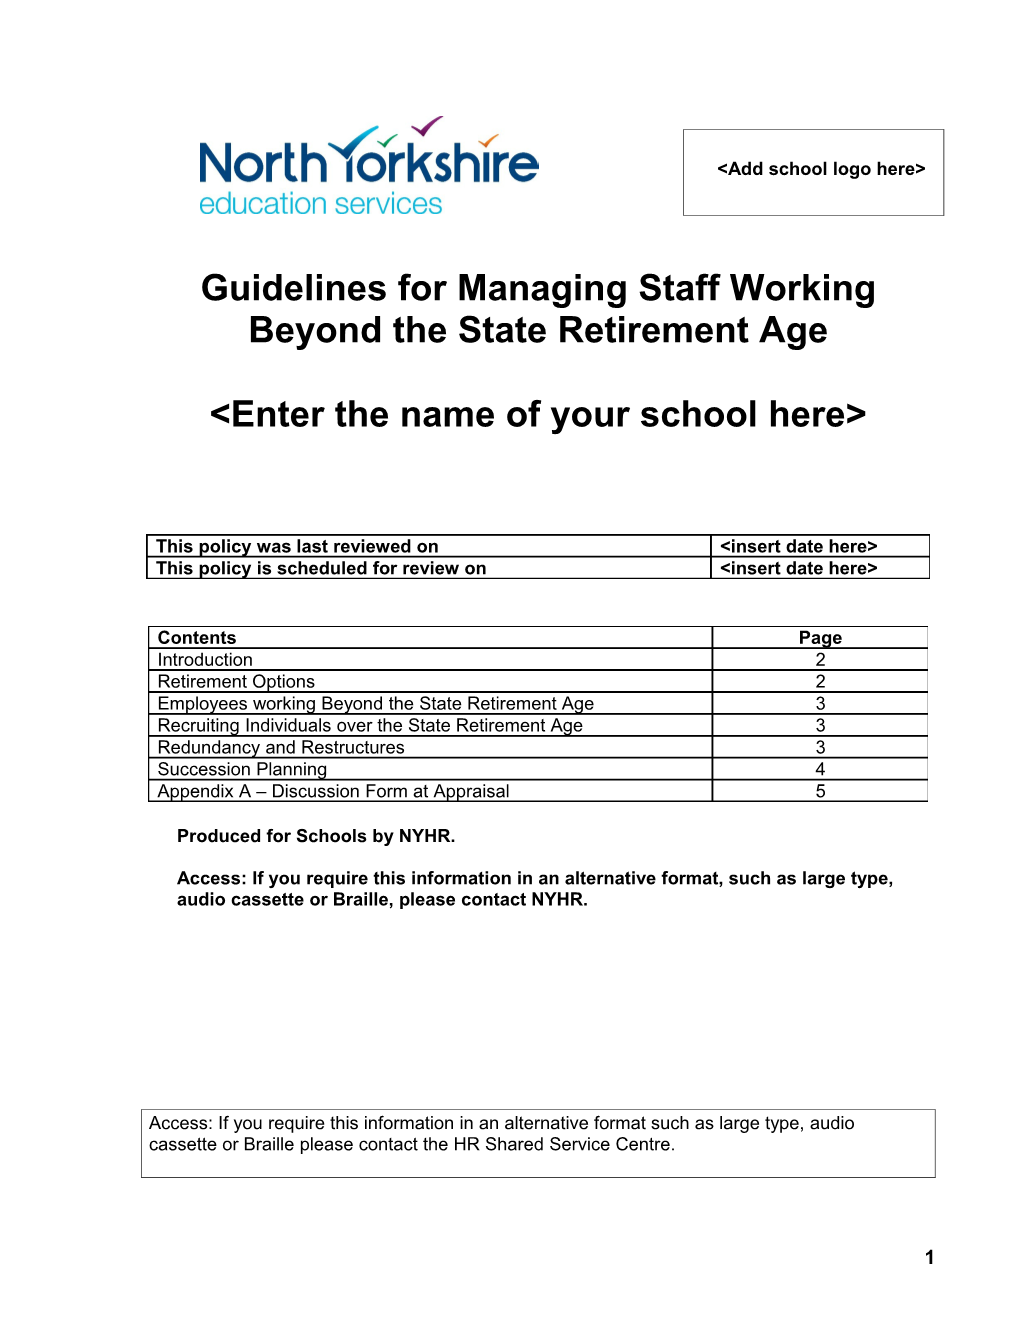 Guidelines for Managing Staff Working Beyond State Retirement Age